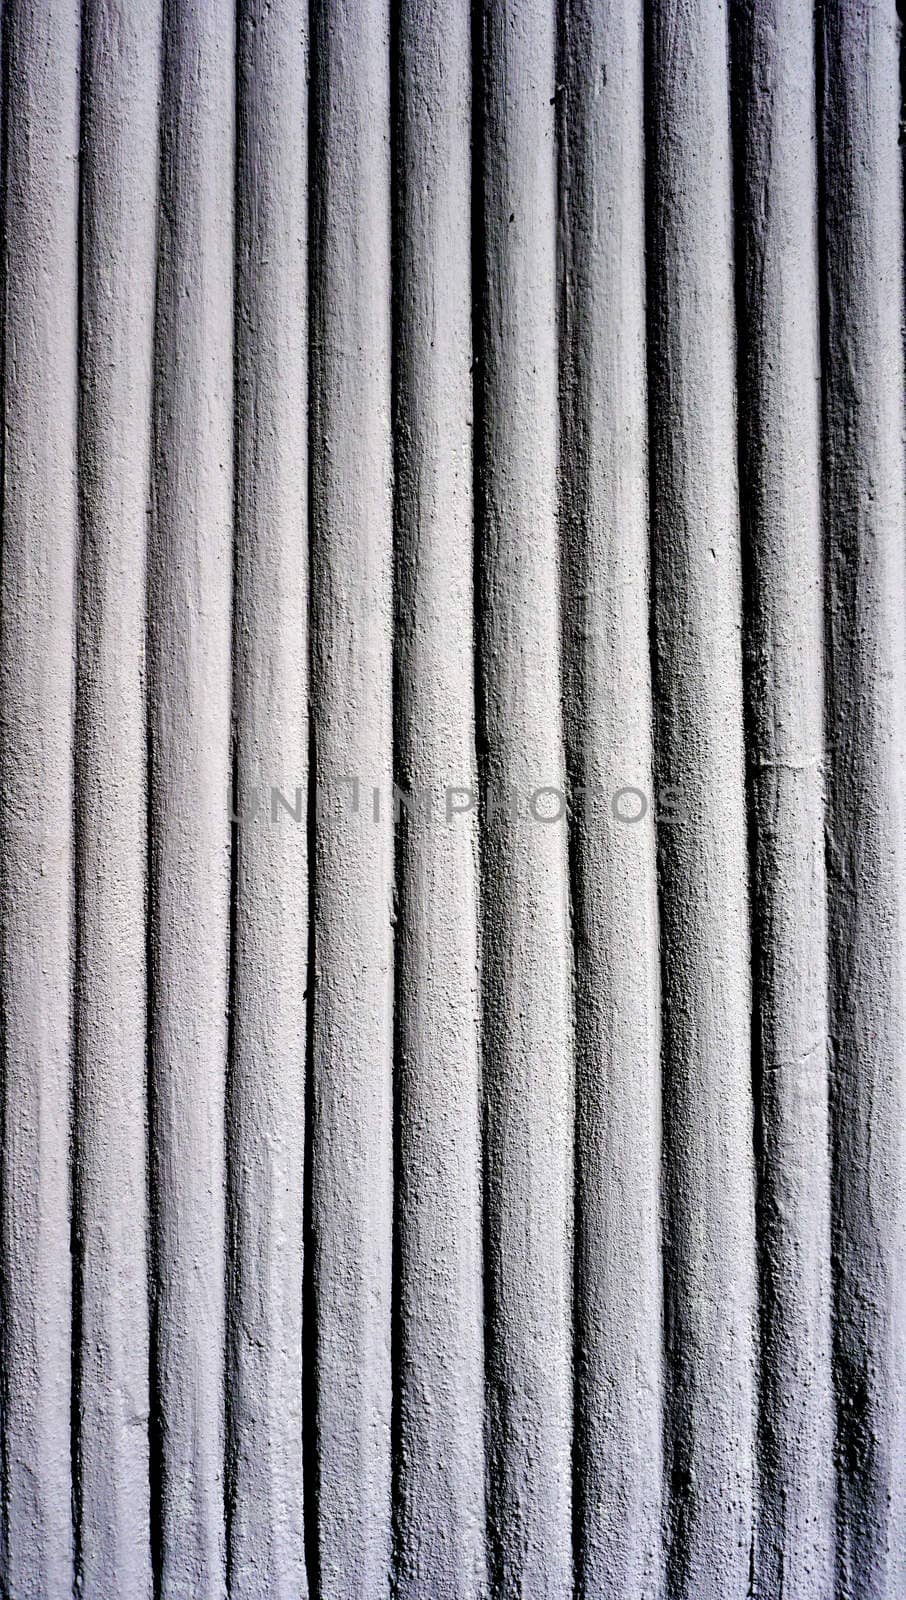 rough wall texture close up vertical by polarbearstudio